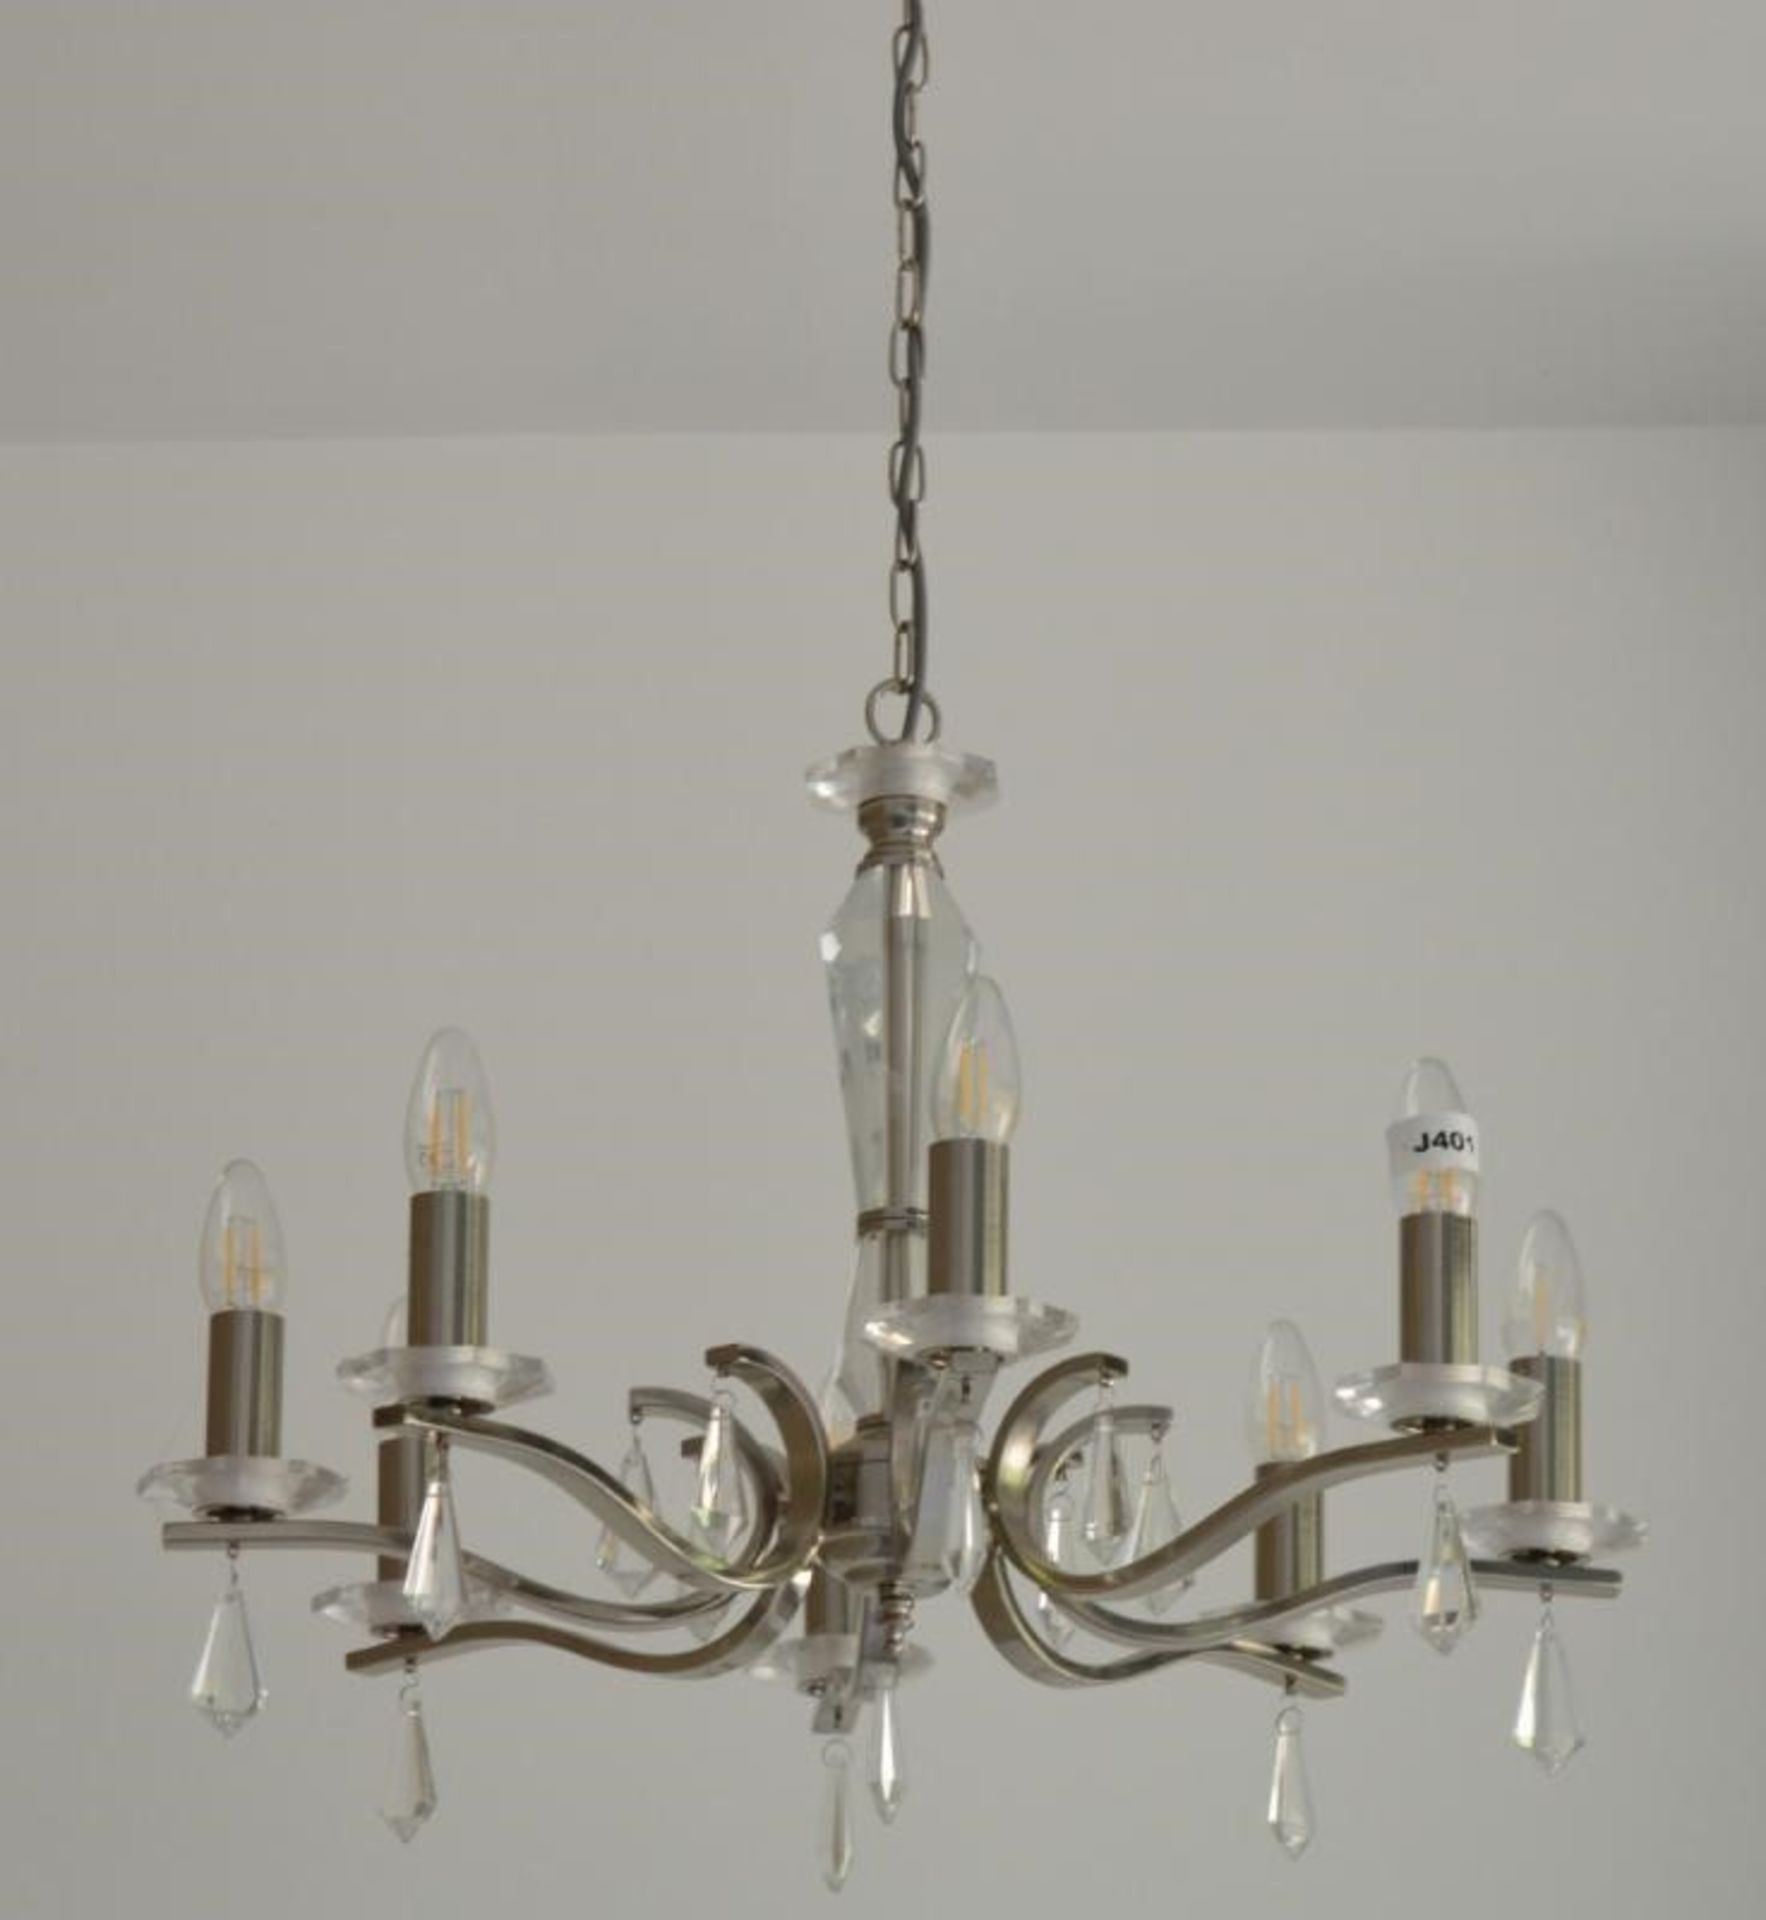 1 x Royale Satin Silver Metal 8 Light Ceiling Fitting With Hexagonal Glass Sconces - Ex Display Stoc - Image 3 of 6